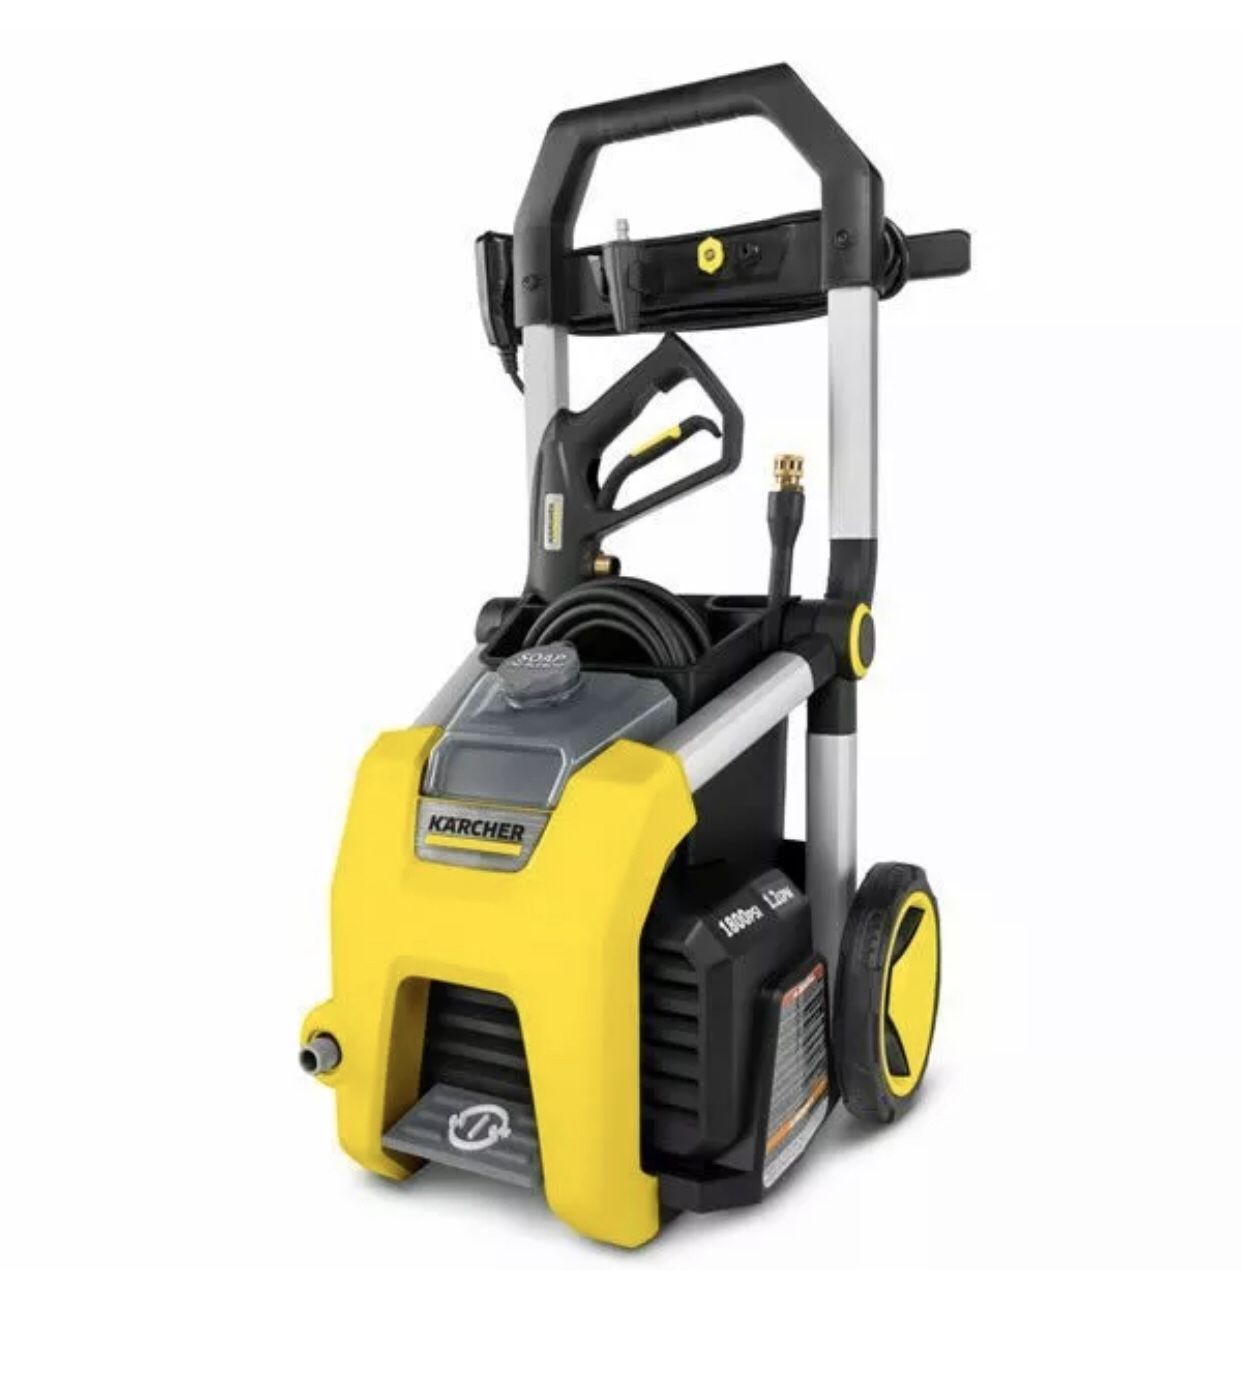 Karcher 1800 PSI Pressure Washer (Electric - Cold Water) Pressure Washer (New)